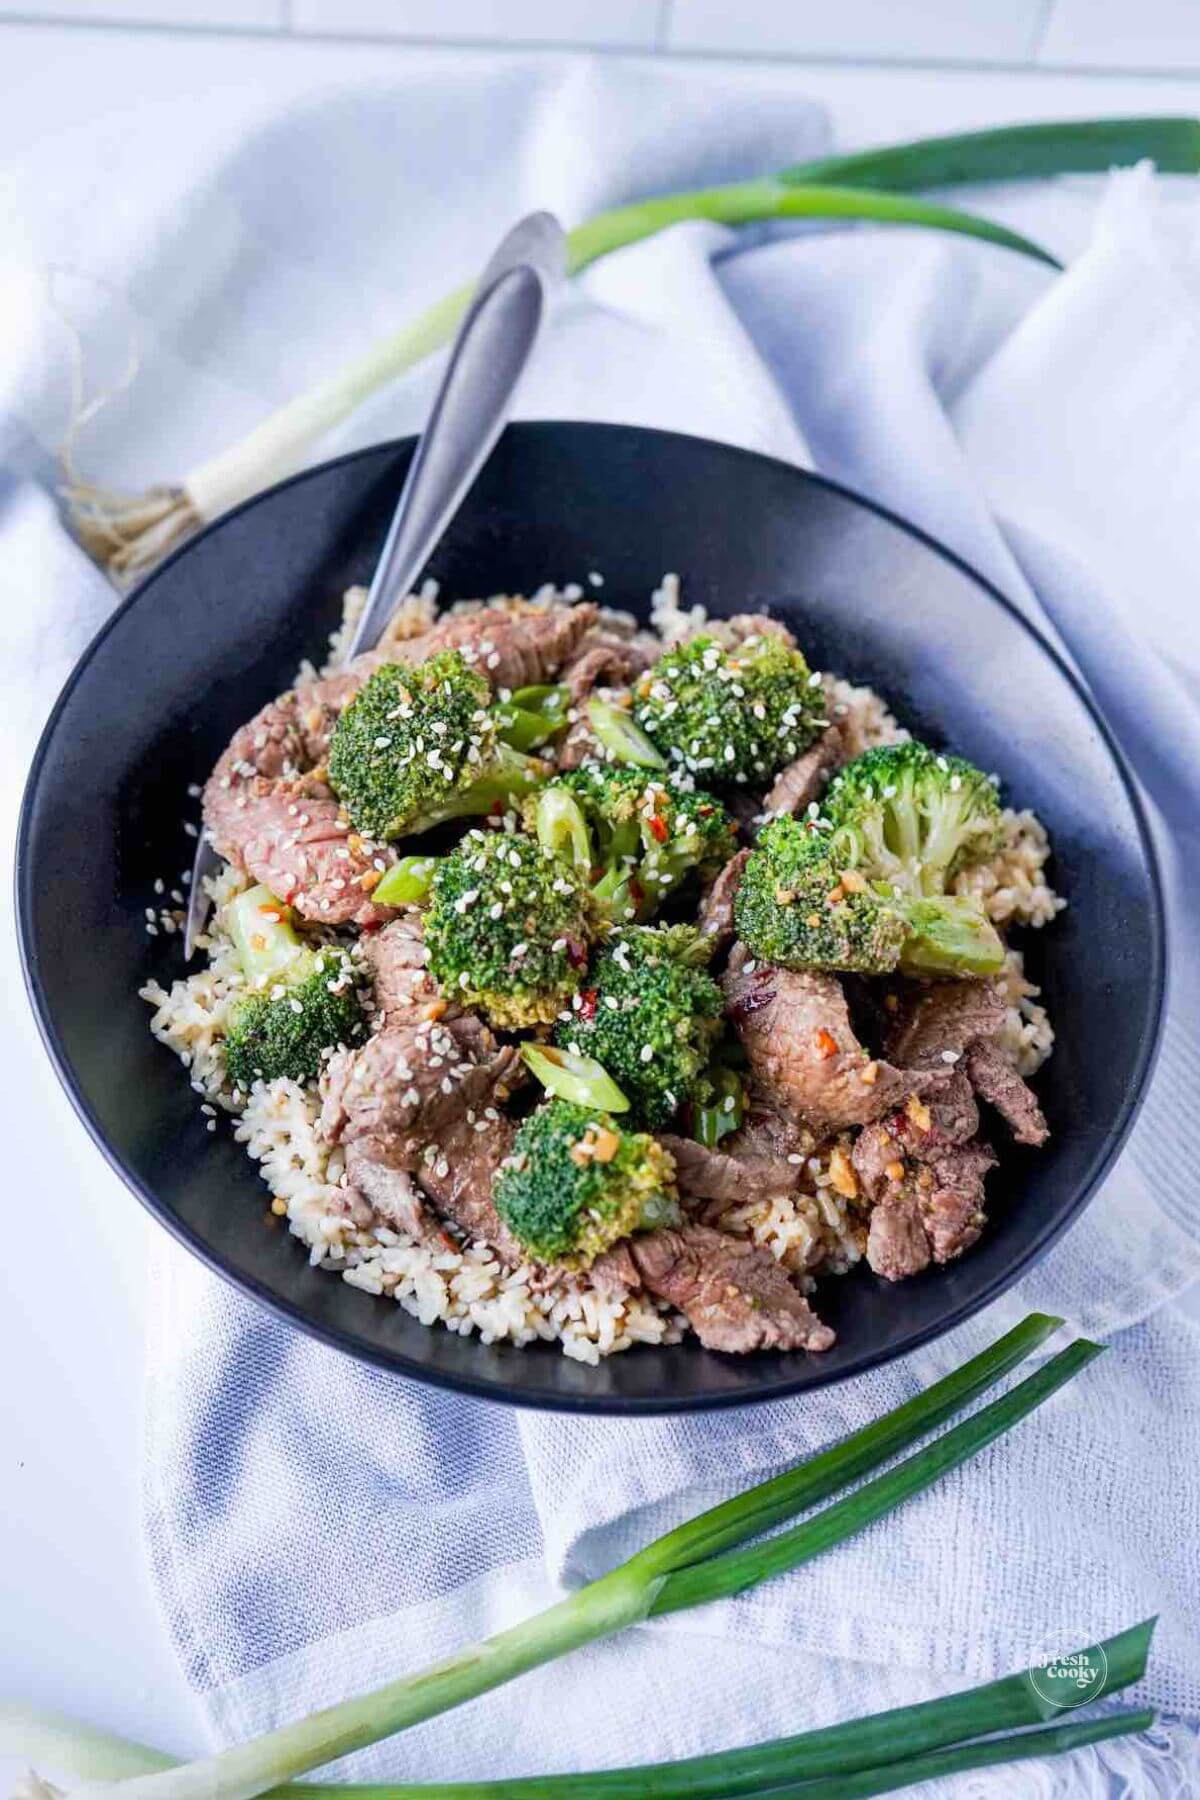 Healthy beef and broccoli stir fry on a bed of brown rice with broccoli.